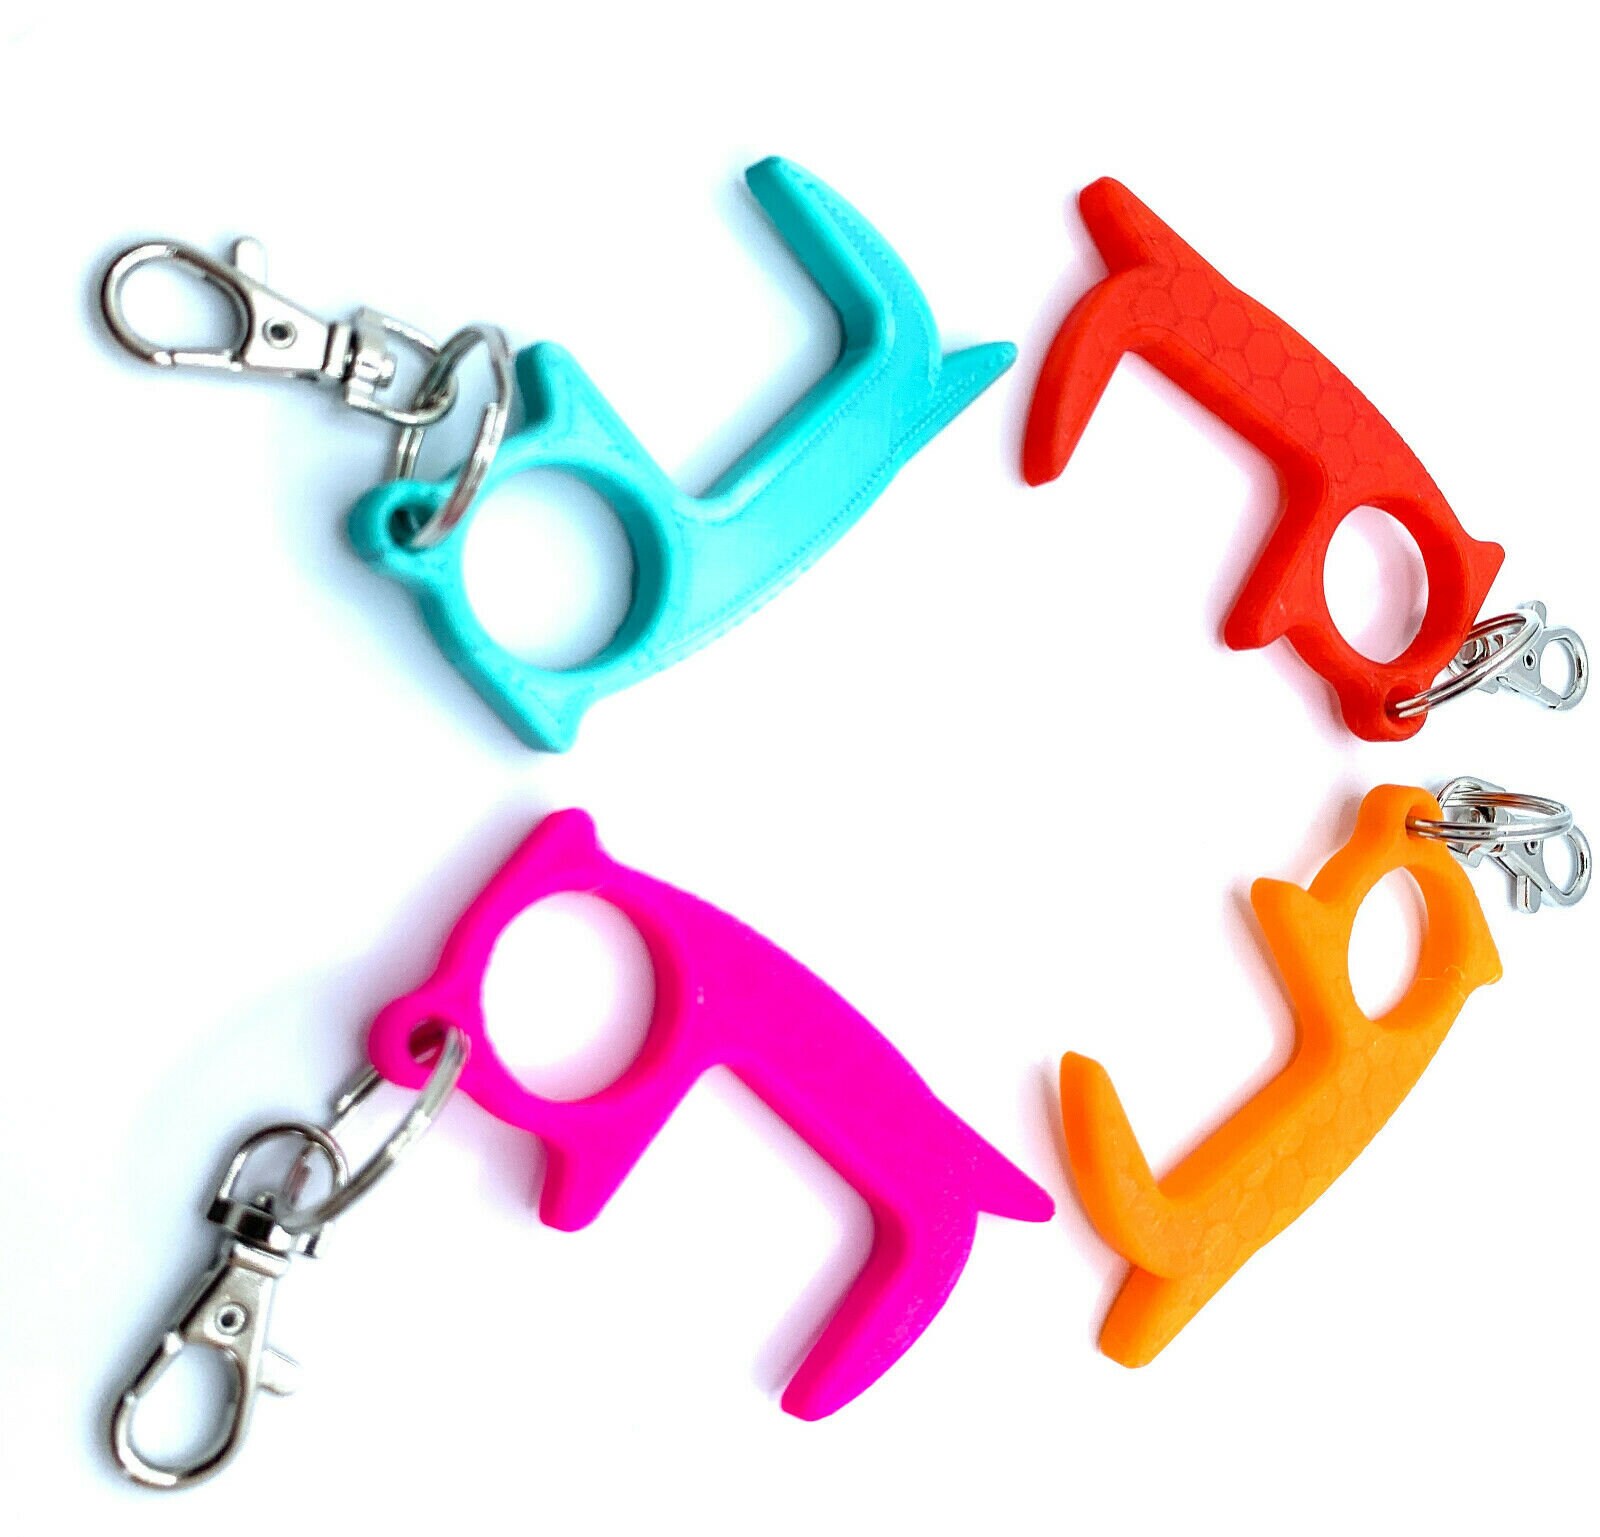 Hands-Free Door Opener Key Chain w/ Stylus Contactless Hygienic Protection UK 